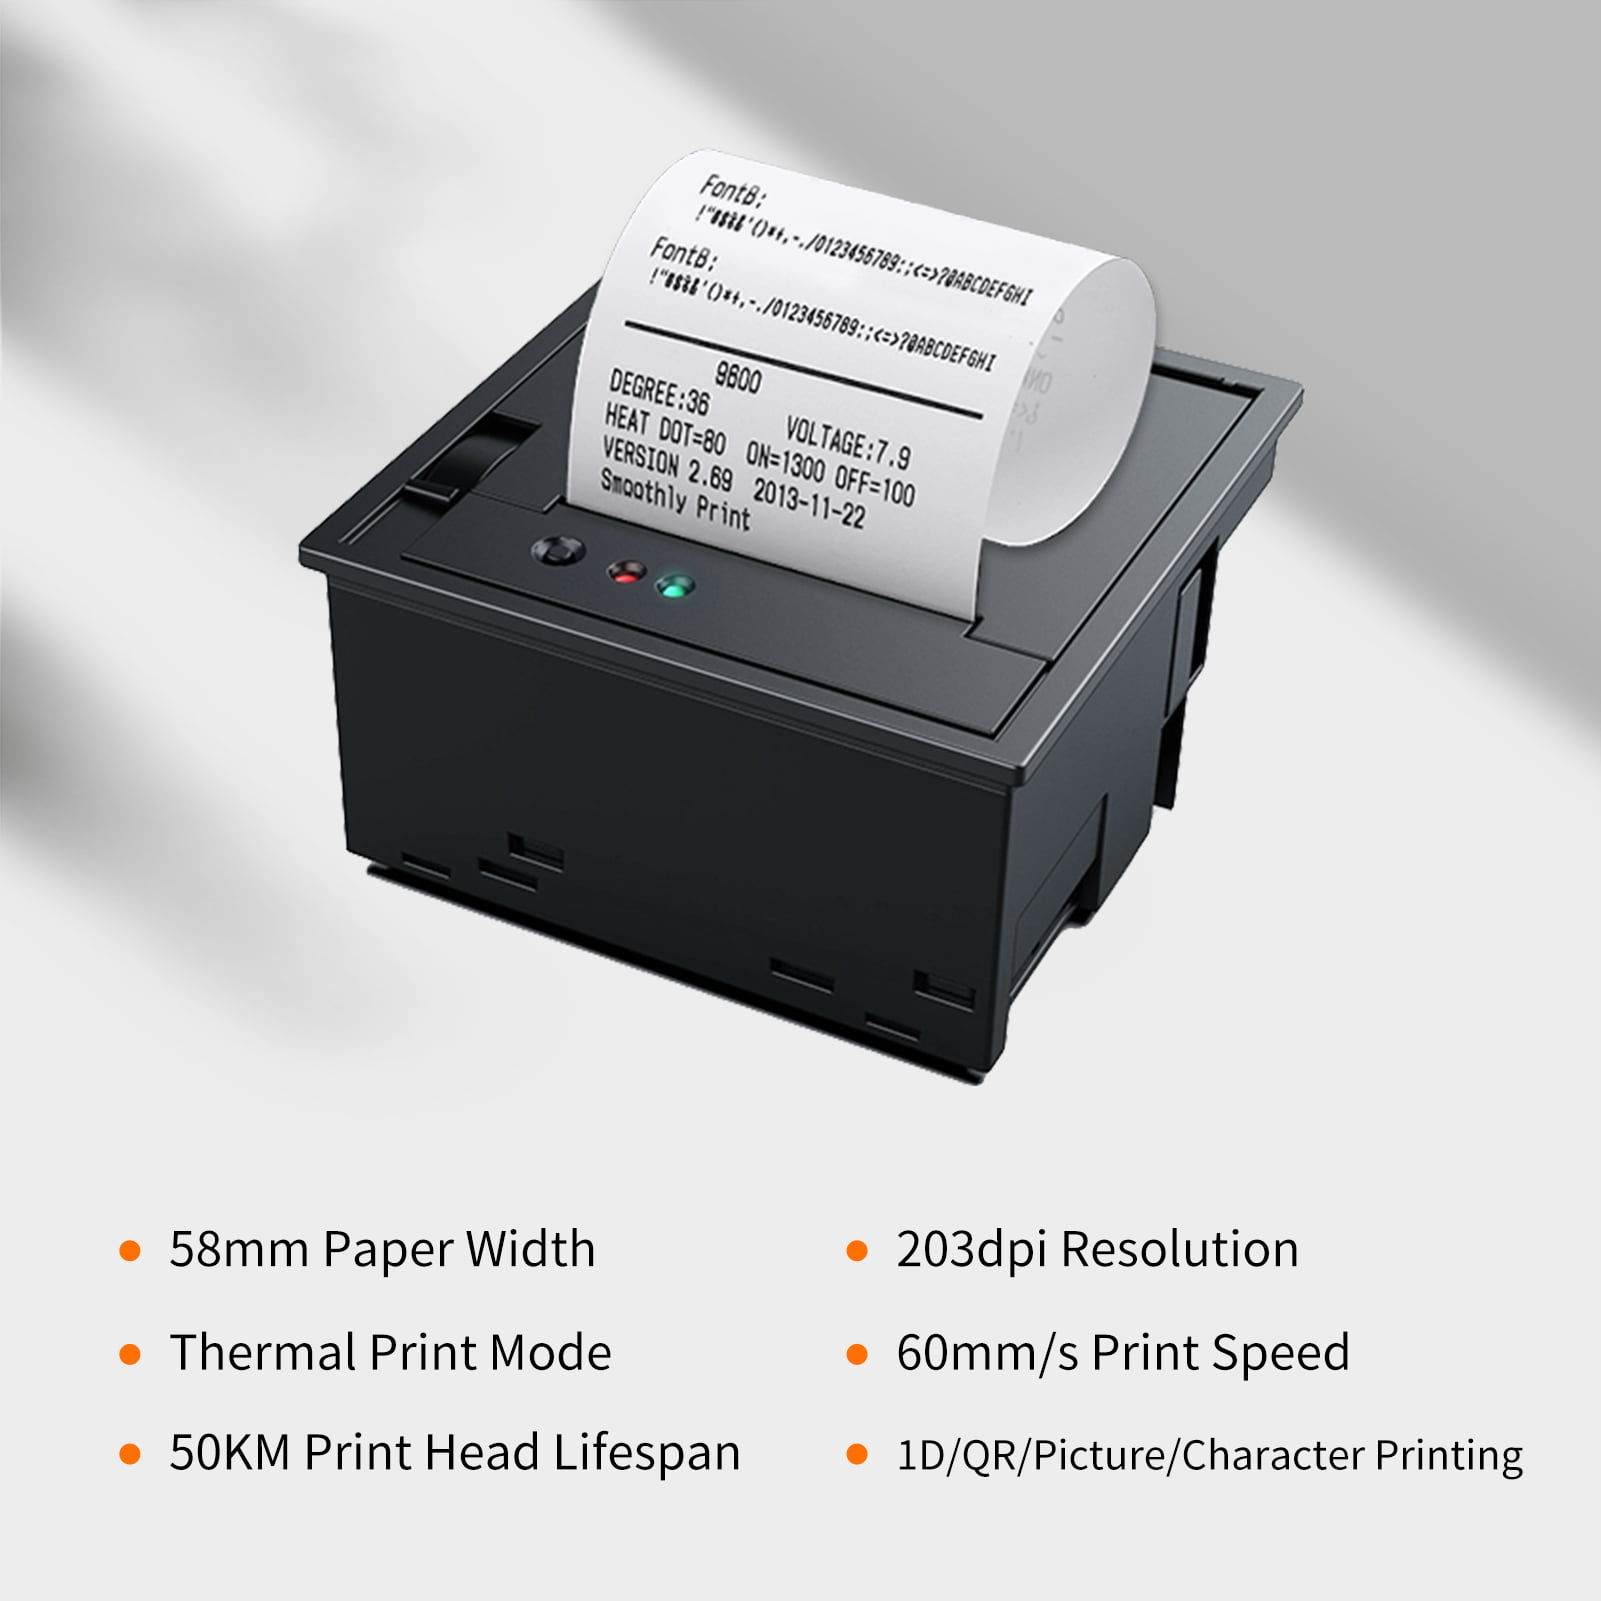 Embedded Thermal Receipt Printer 58MM Mini Label Printing Module with USB+TTL Serial Port Support ESC/POS Commands for Weighing Apparatus Register Self-Service Terminal - Walmart.com